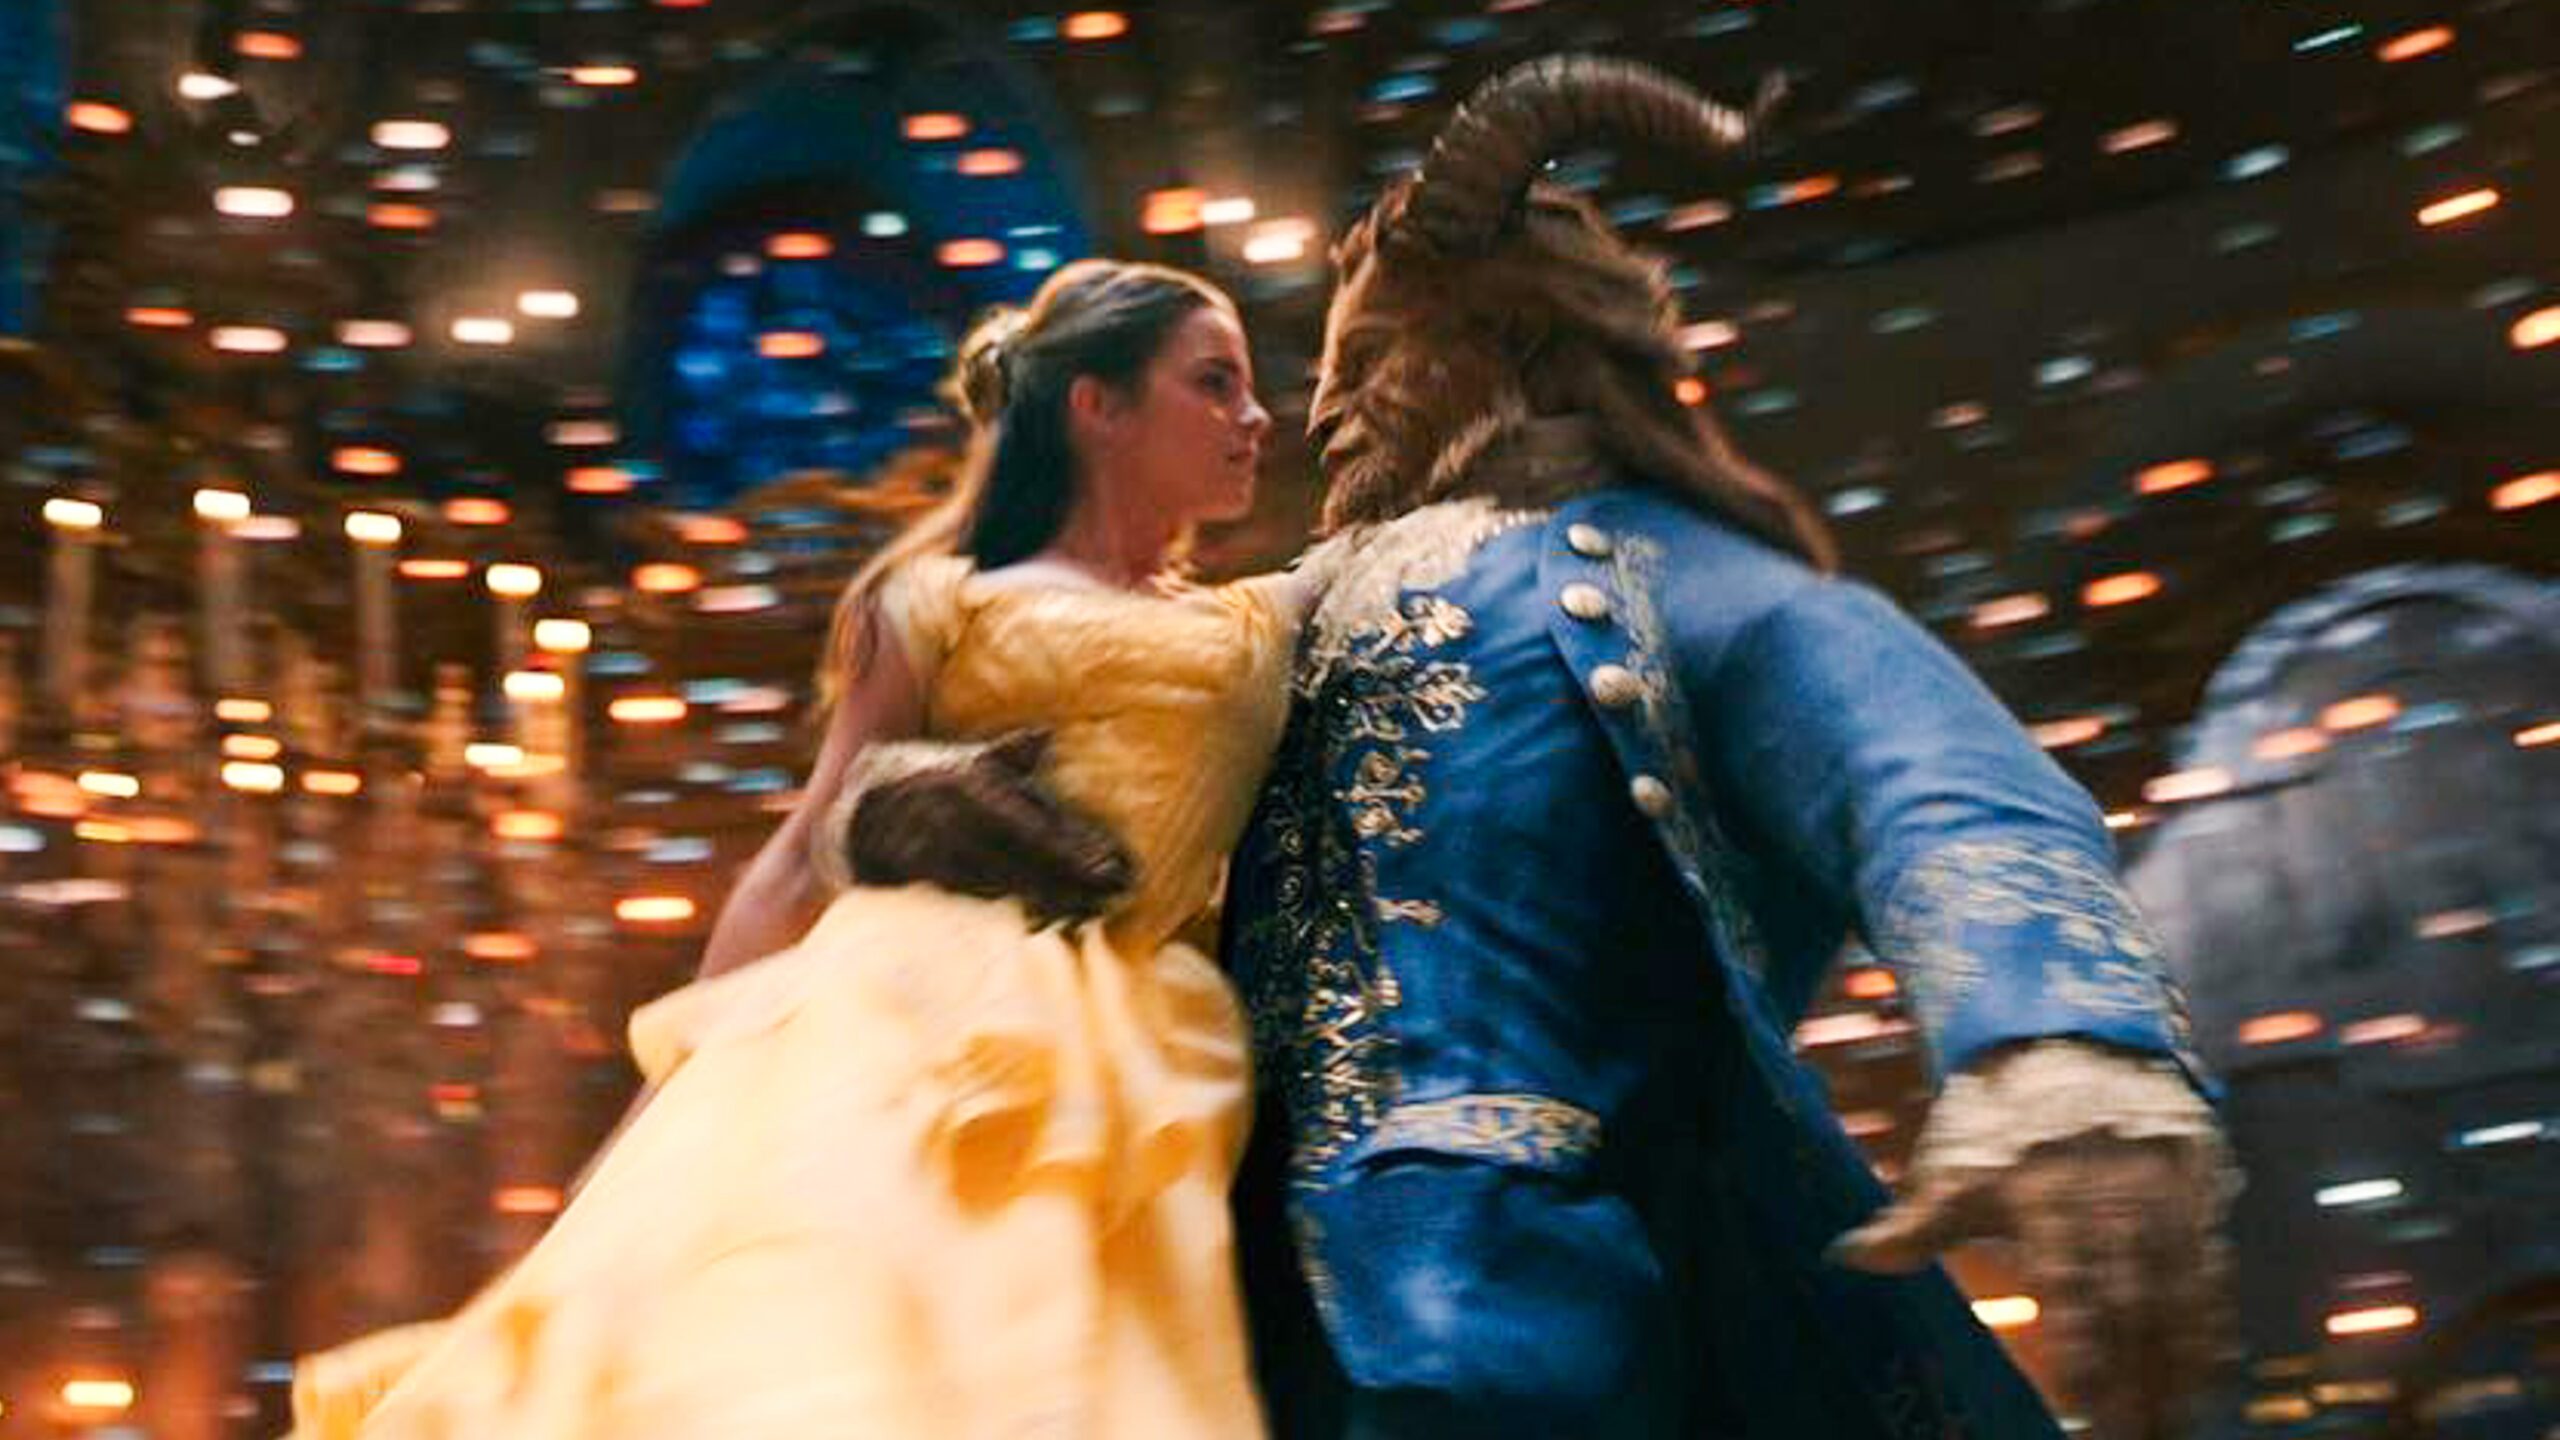 Disney scraps Malaysia ‘Beauty and the Beast’ release over censorship